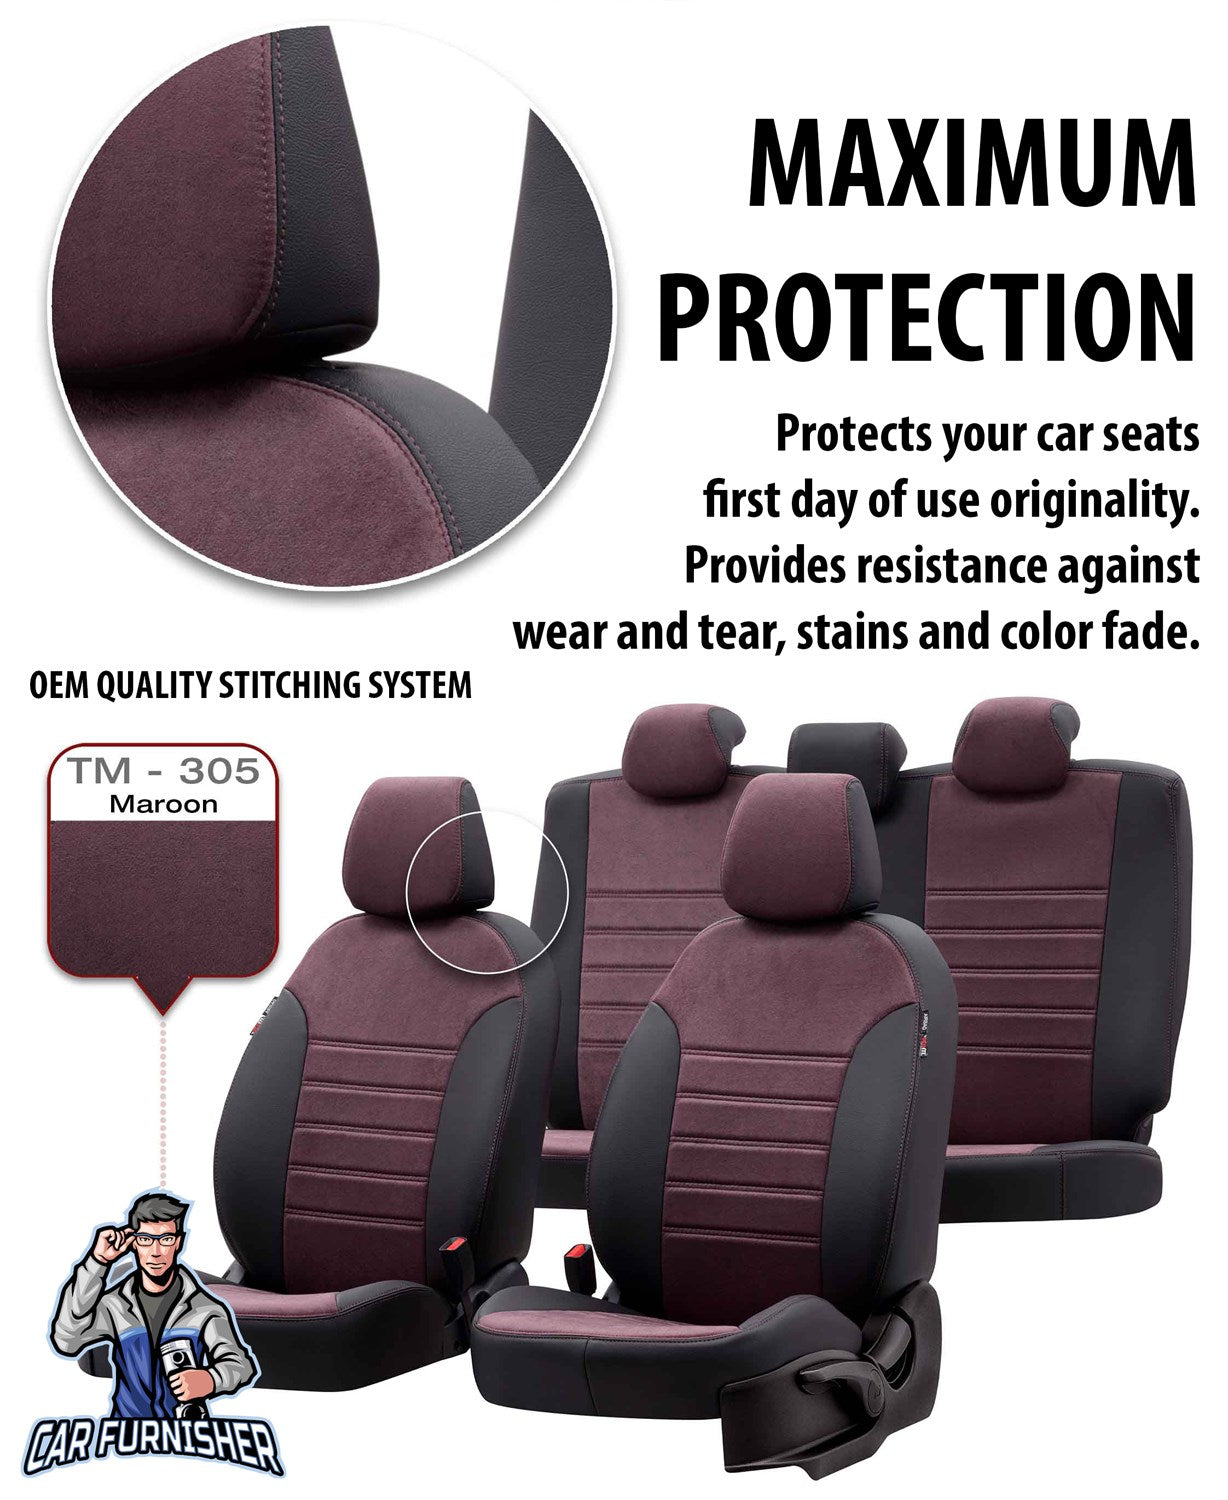 Ssangyong Actyon Seat Covers Milano Suede Design Burgundy Leather & Suede Fabric